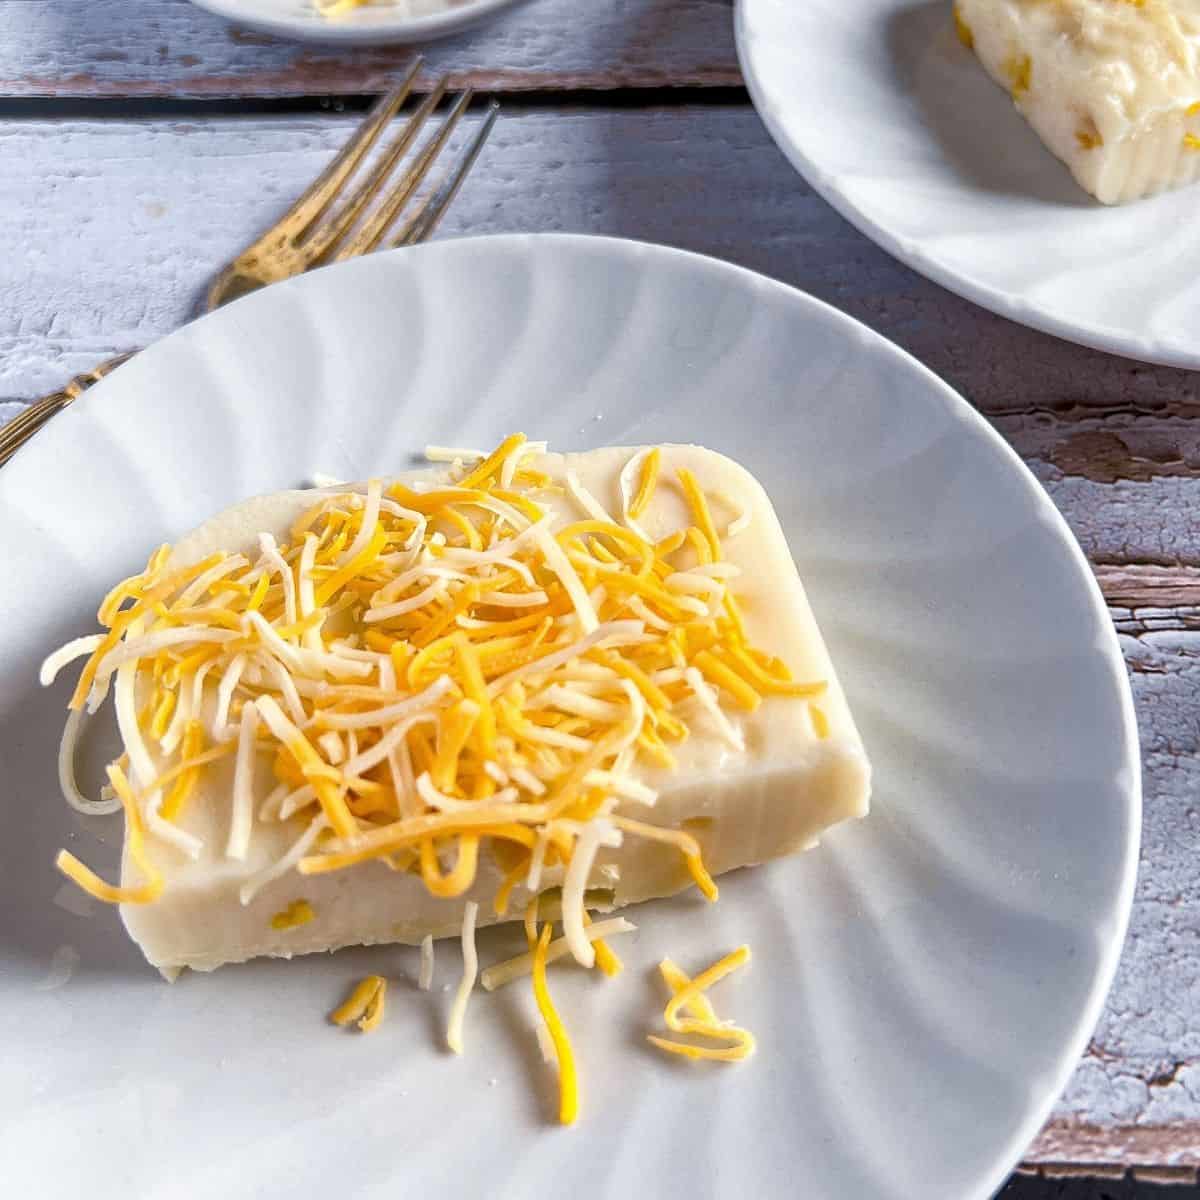 A plate of maja blanca with cheese on top.